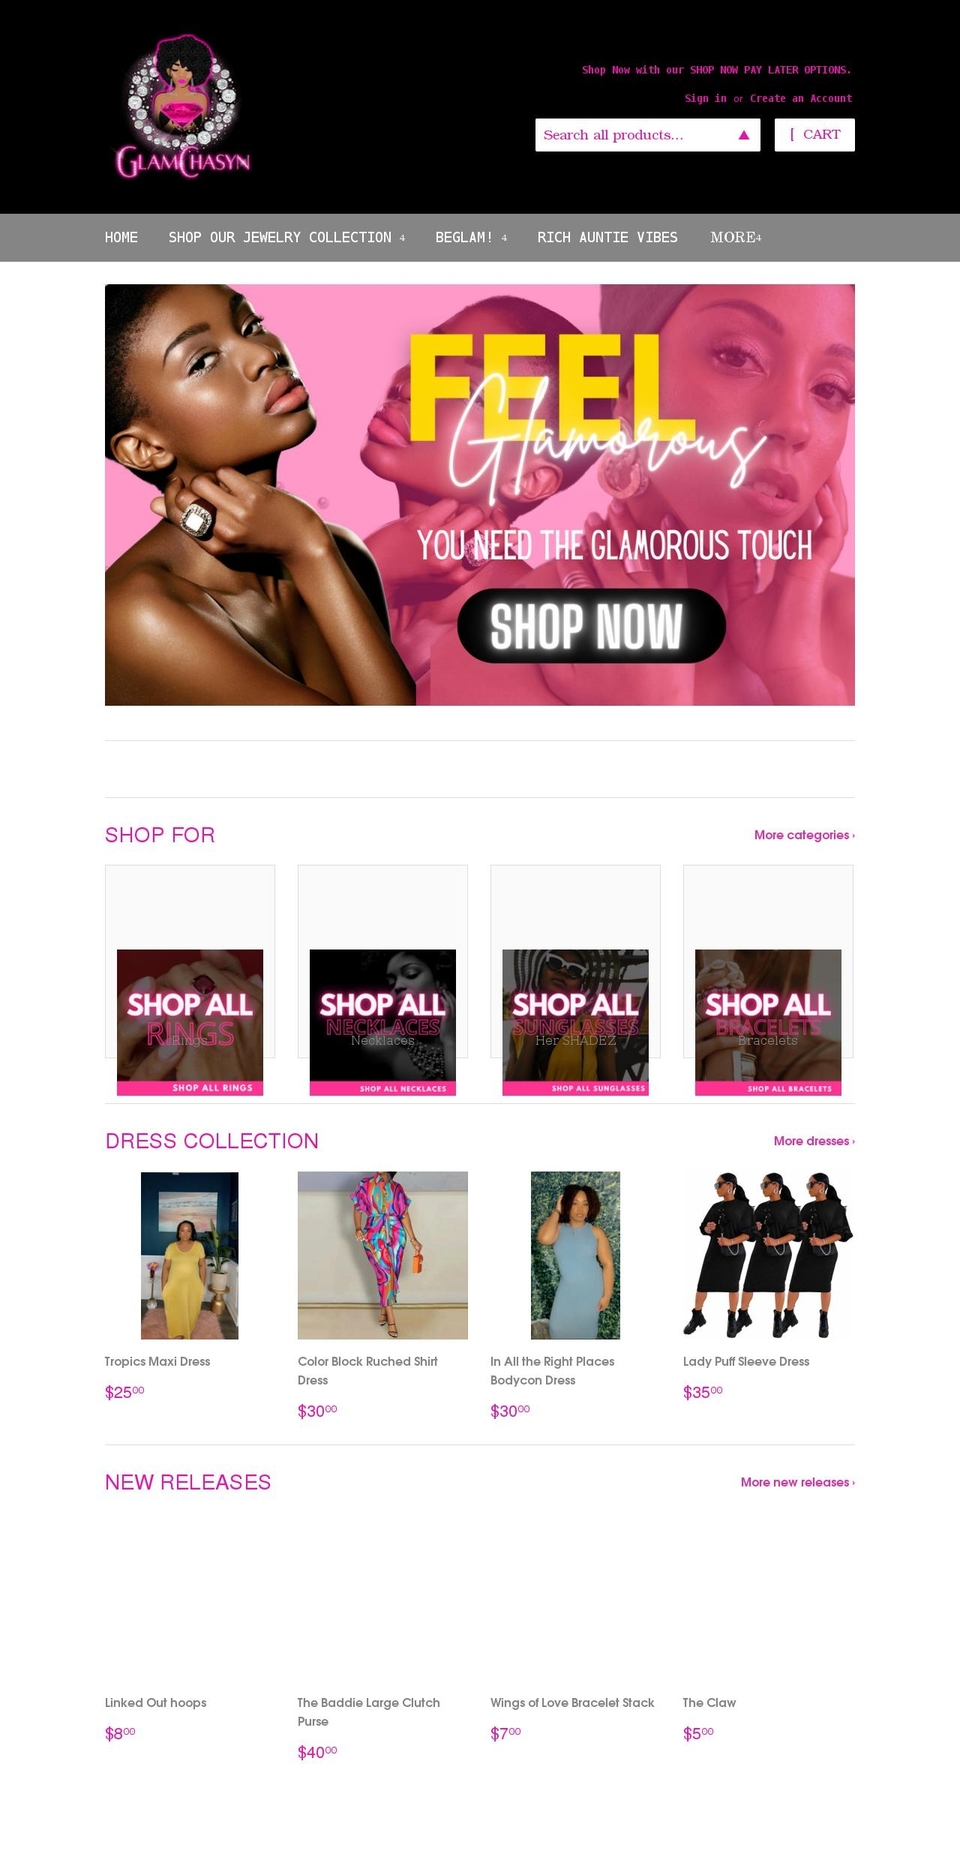 glam Shopify theme site example glamchasyn.com